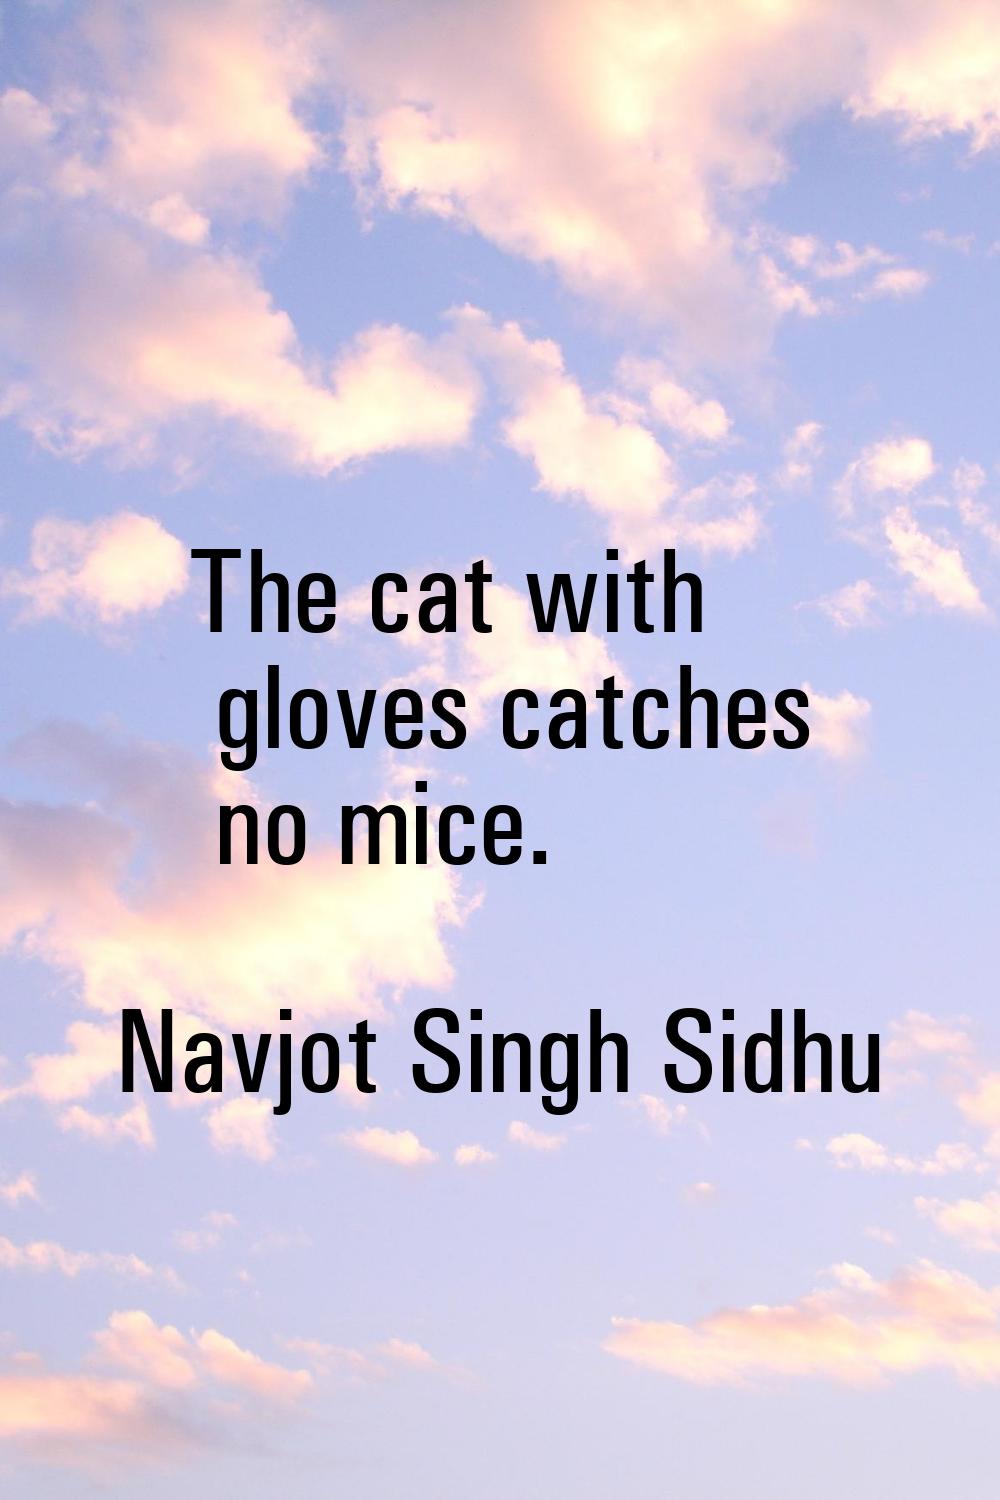 The cat with gloves catches no mice.